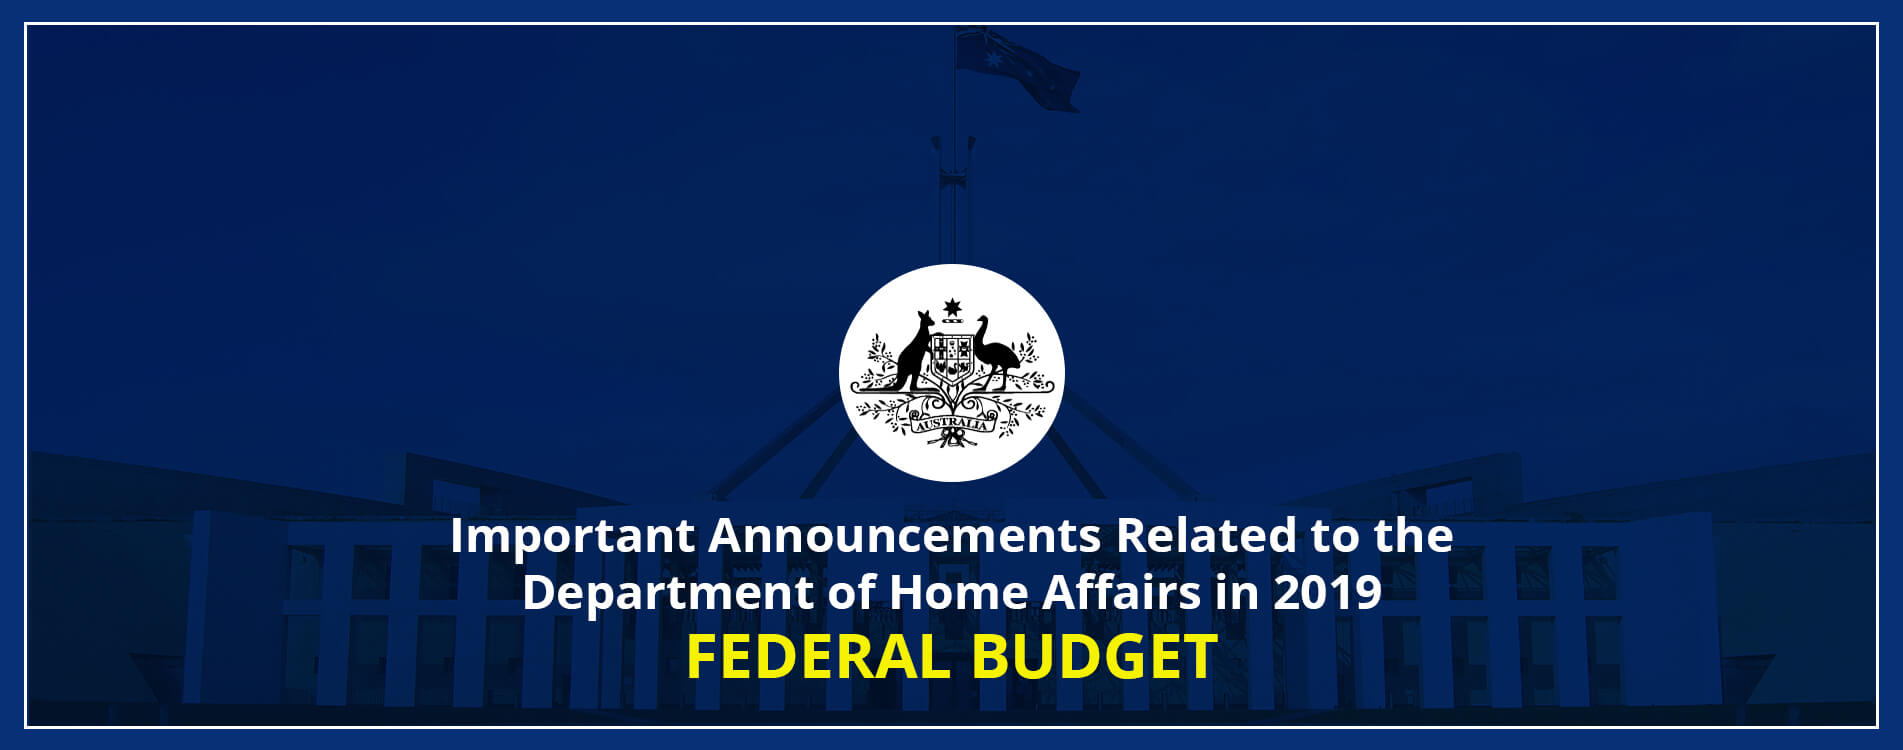 Important Announcements Related to the Department of Home Affairs in 2019 Federal Budget